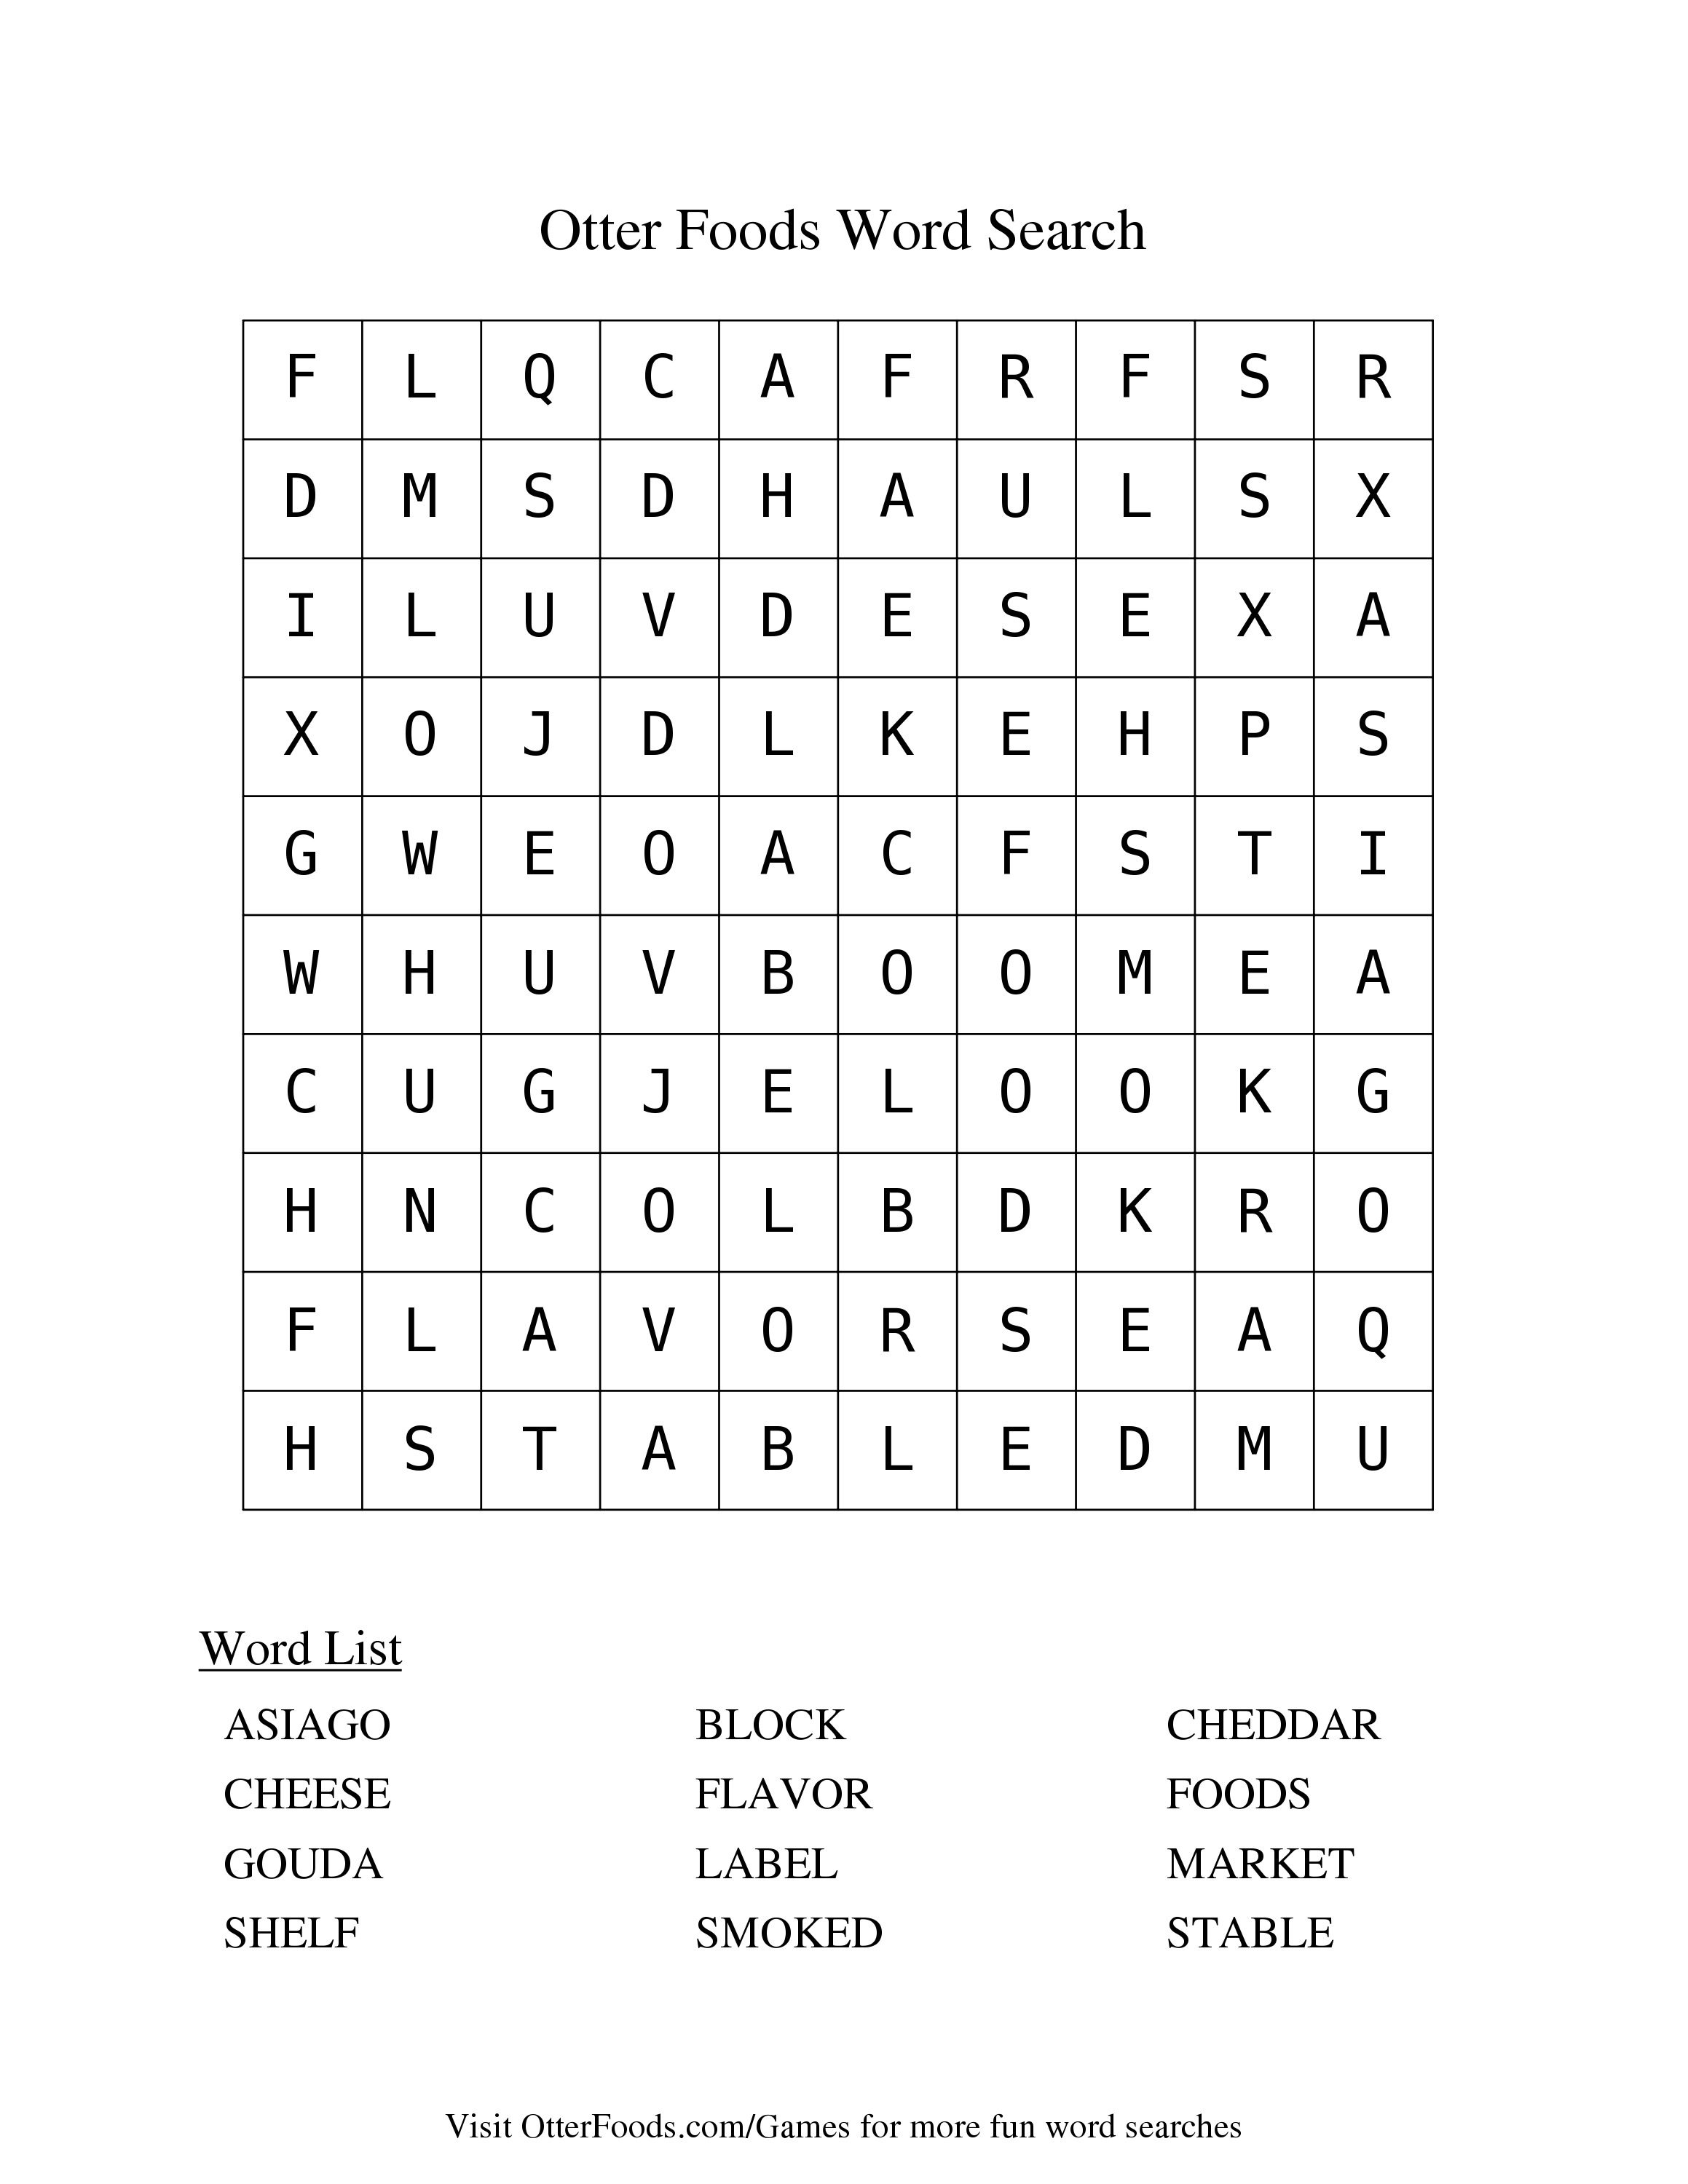 Example Word Search From Otter Foods